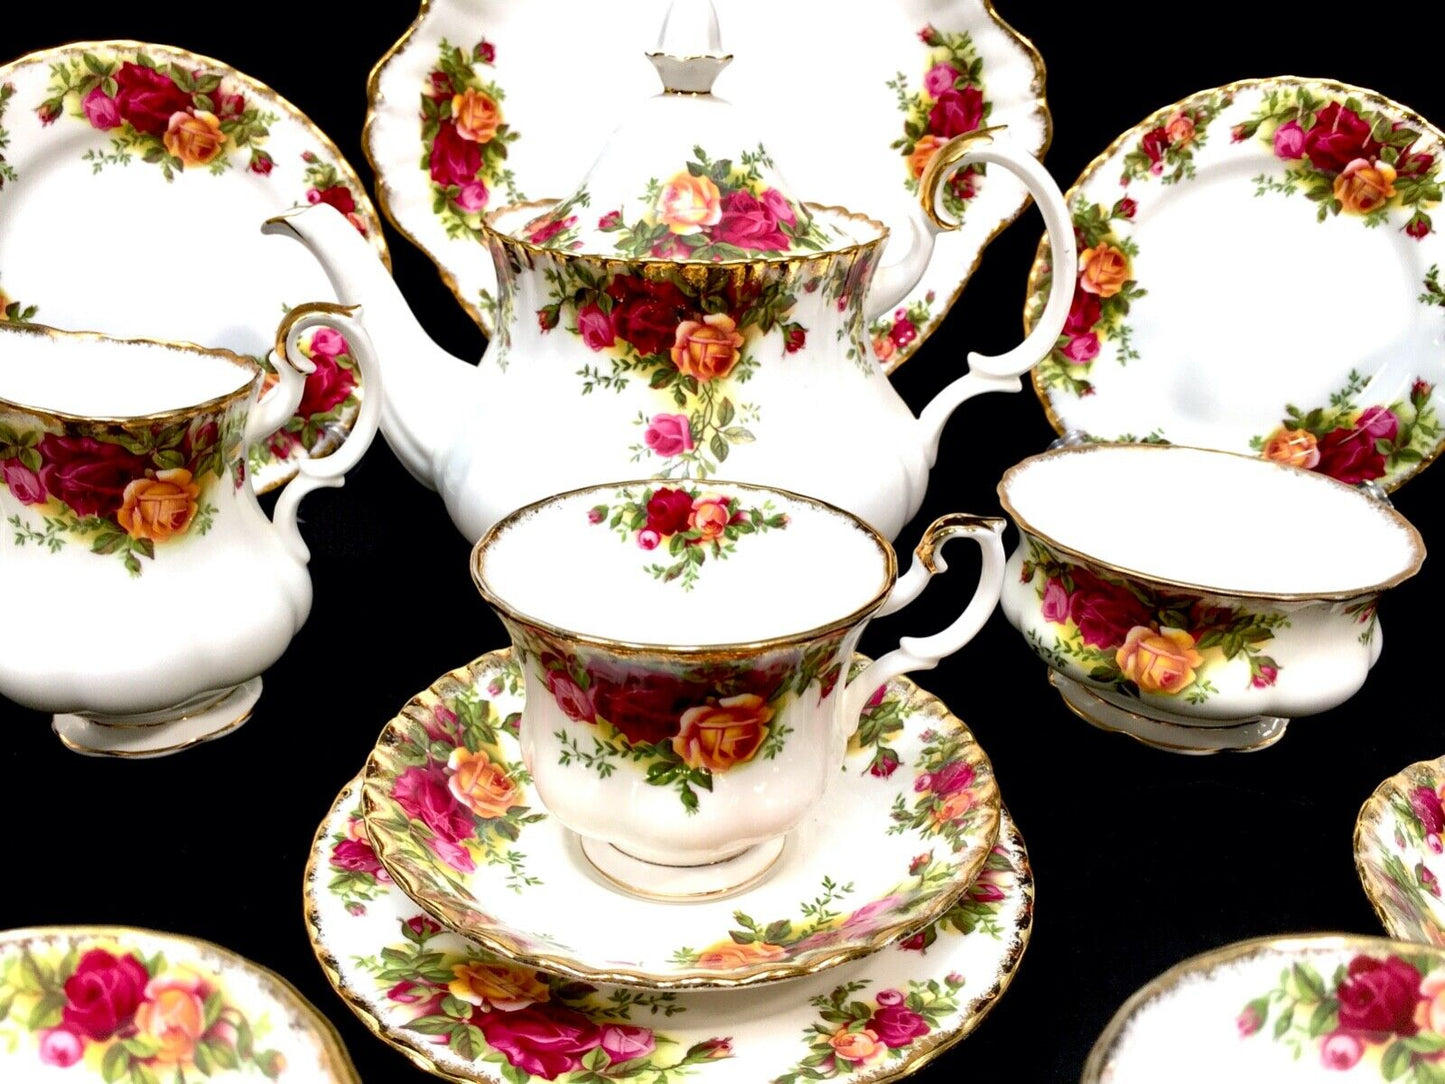 Royal Albert Old Country Roses Tea Service Set for 6 People / Vintage 1960s